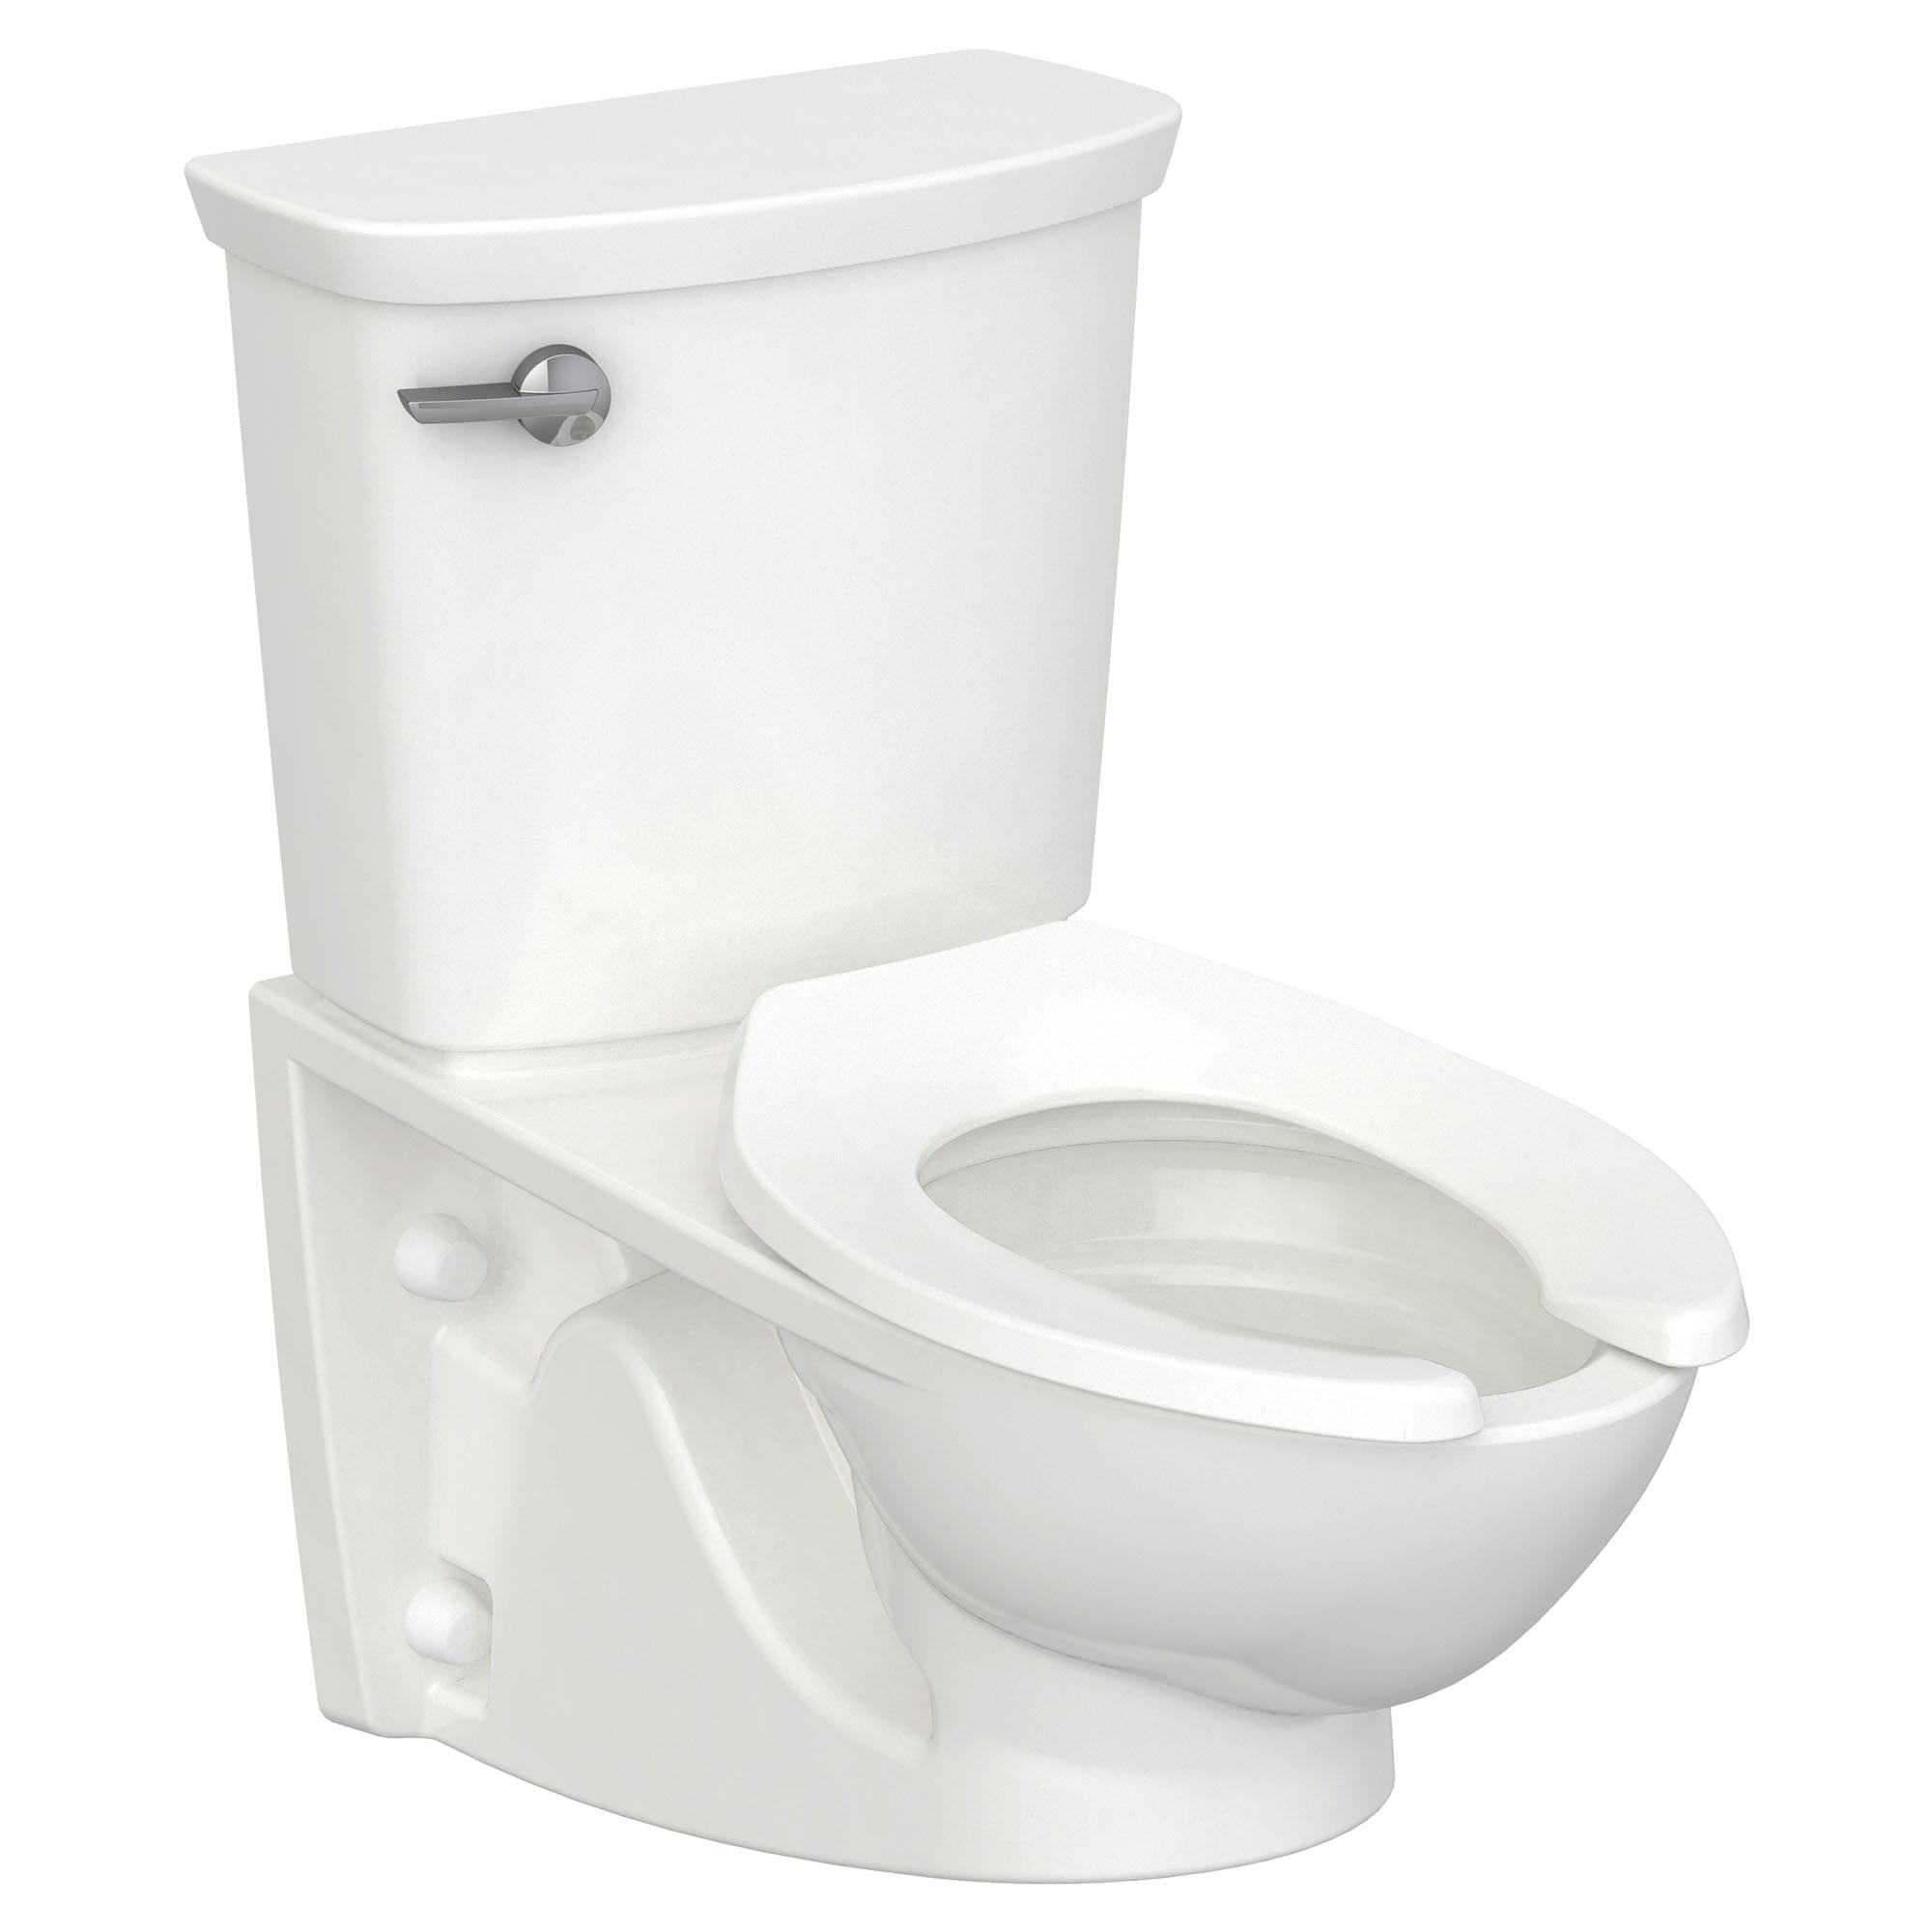 Glenwall® VorMax® Two-Piece 1.28 gpf/4.8 Lpf Back Outlet Elongated Wall-Hung EverClean® Toilet